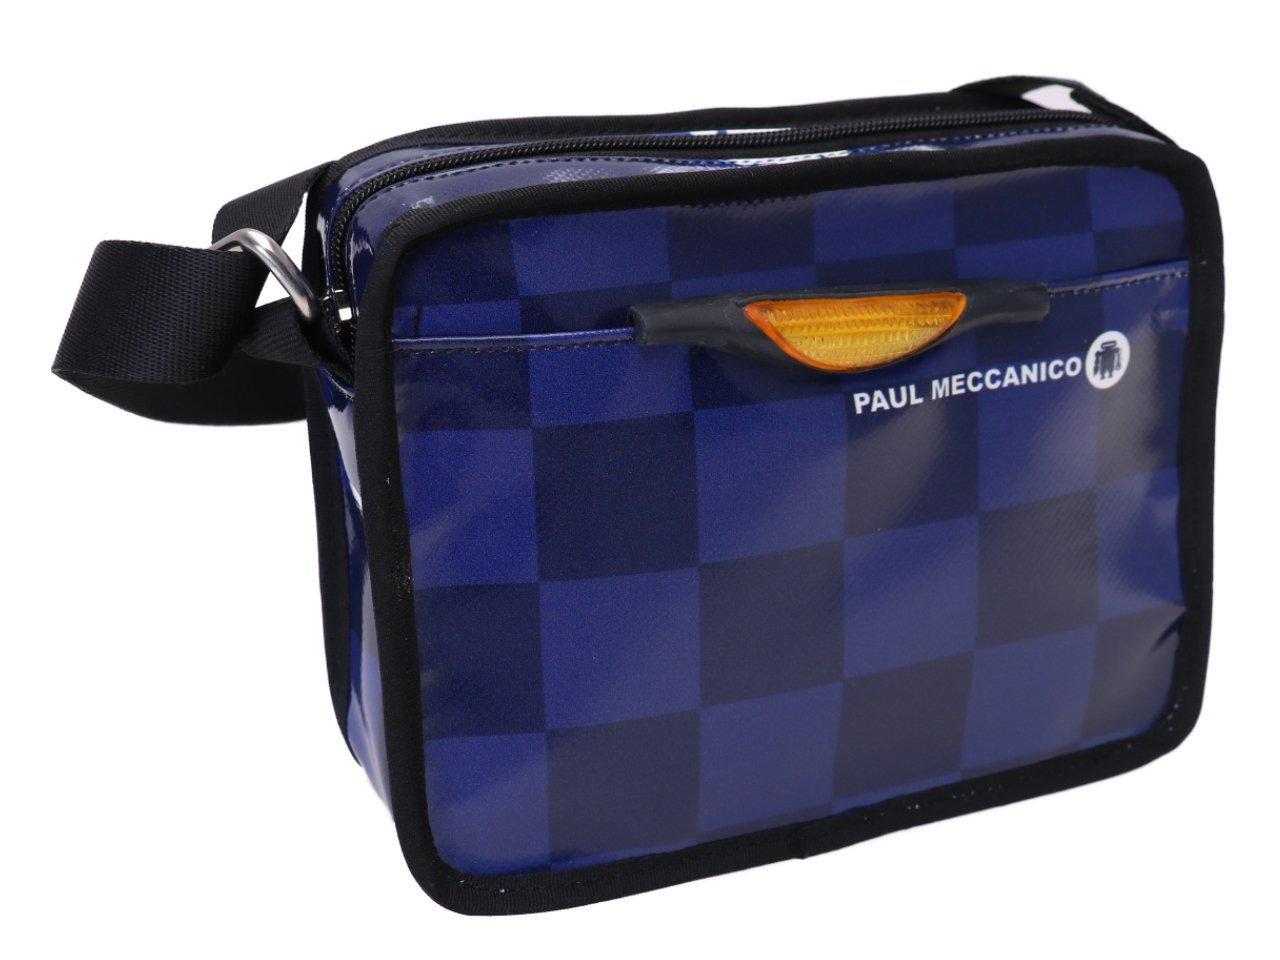 SMALL CROSSBODY BAG NAVY AND BLUE WITH GEOMETRIC FANTASY. MODEL FRIK MADE OF LORRY TARPAULIN. - Limited Edition Paul Meccanico